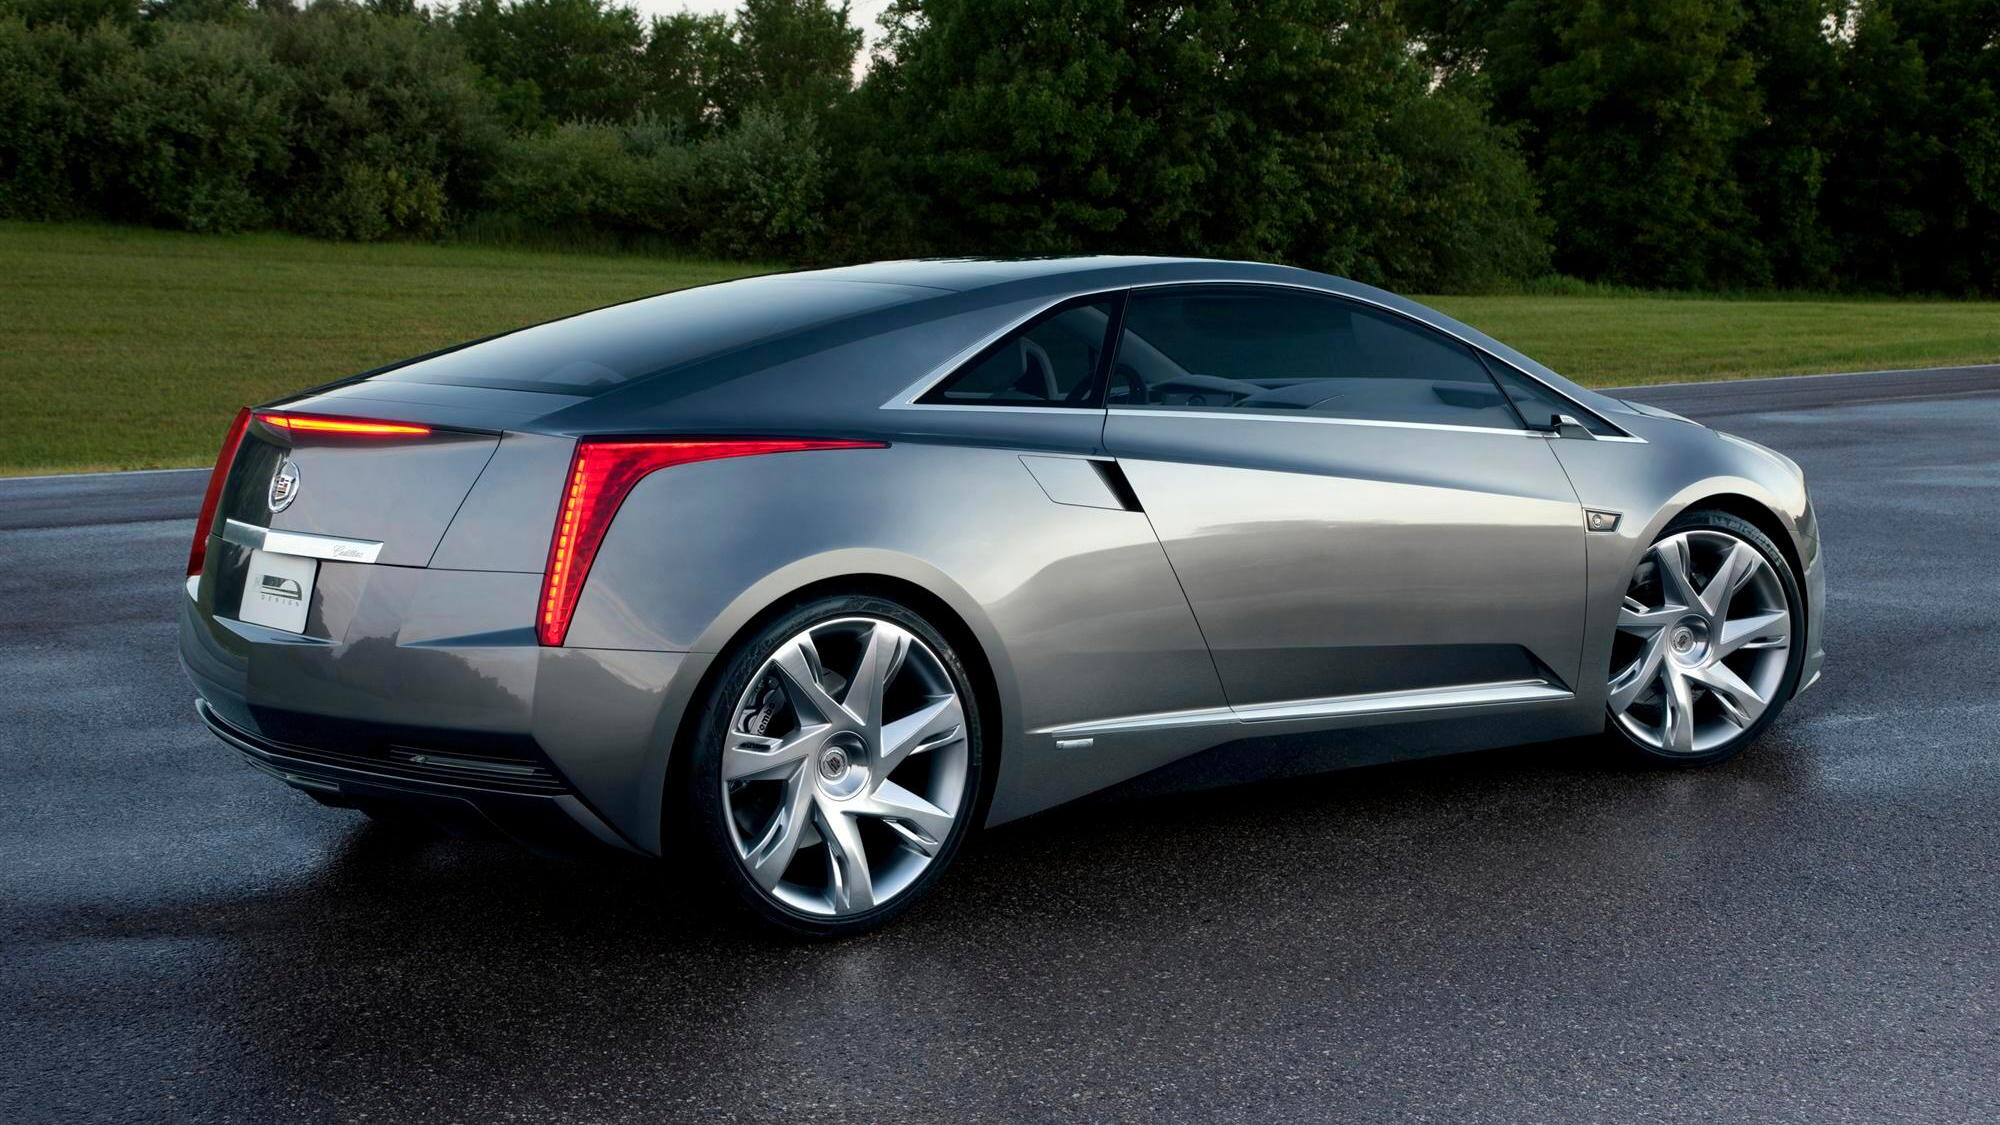 New Details On Cadillac ELR ExtendedRange Electric Car